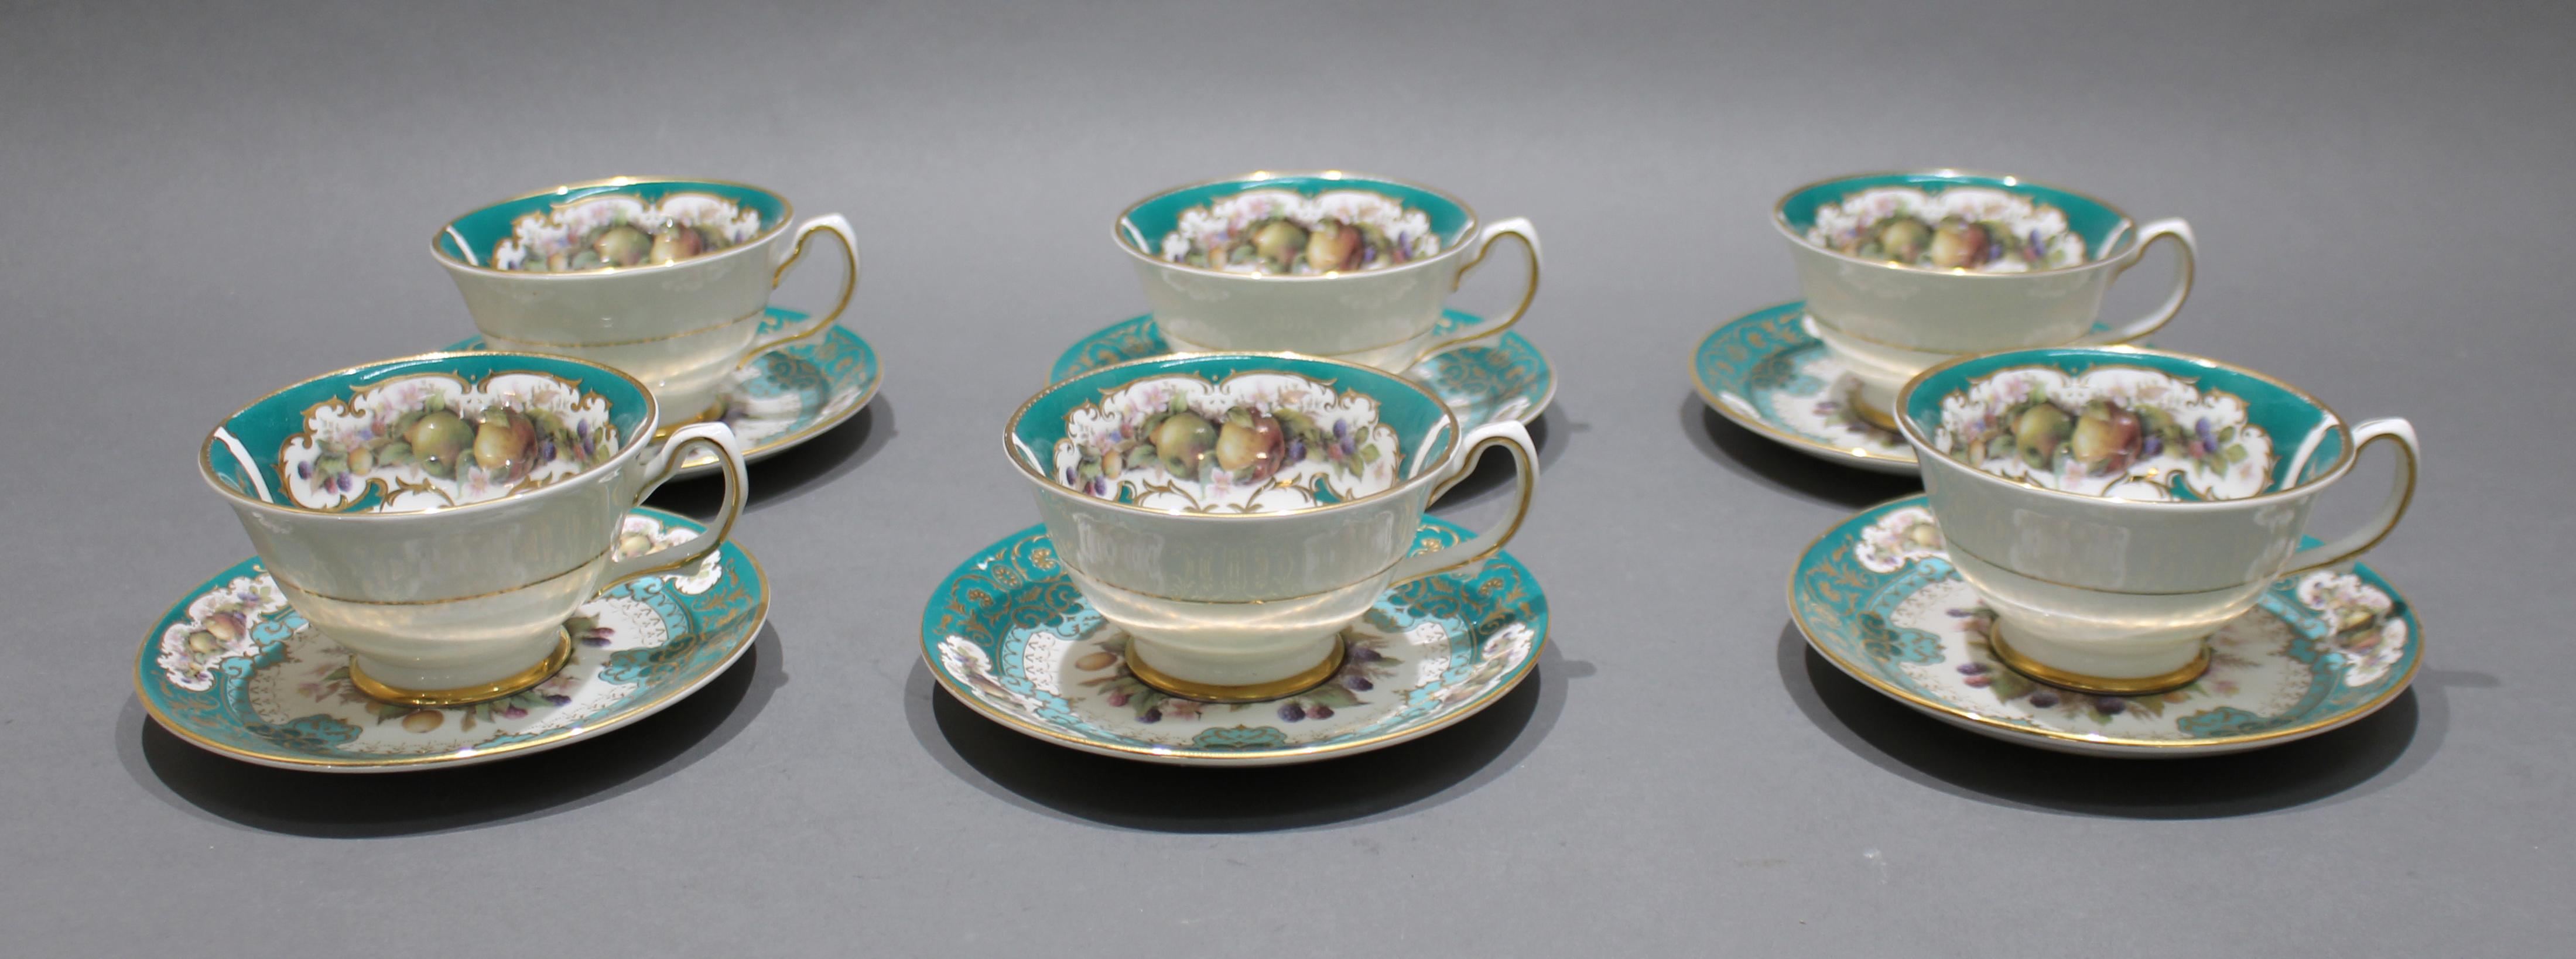 Set of 6 Duchess tea cups & saucers Chatsworth Collection


Vintage mid 20th c.

Duchess fine bone china

The Chatsworth Collection

Made in England

Set of 6 tea cups & saucers.

White & green ground with fruit decoration and profuse